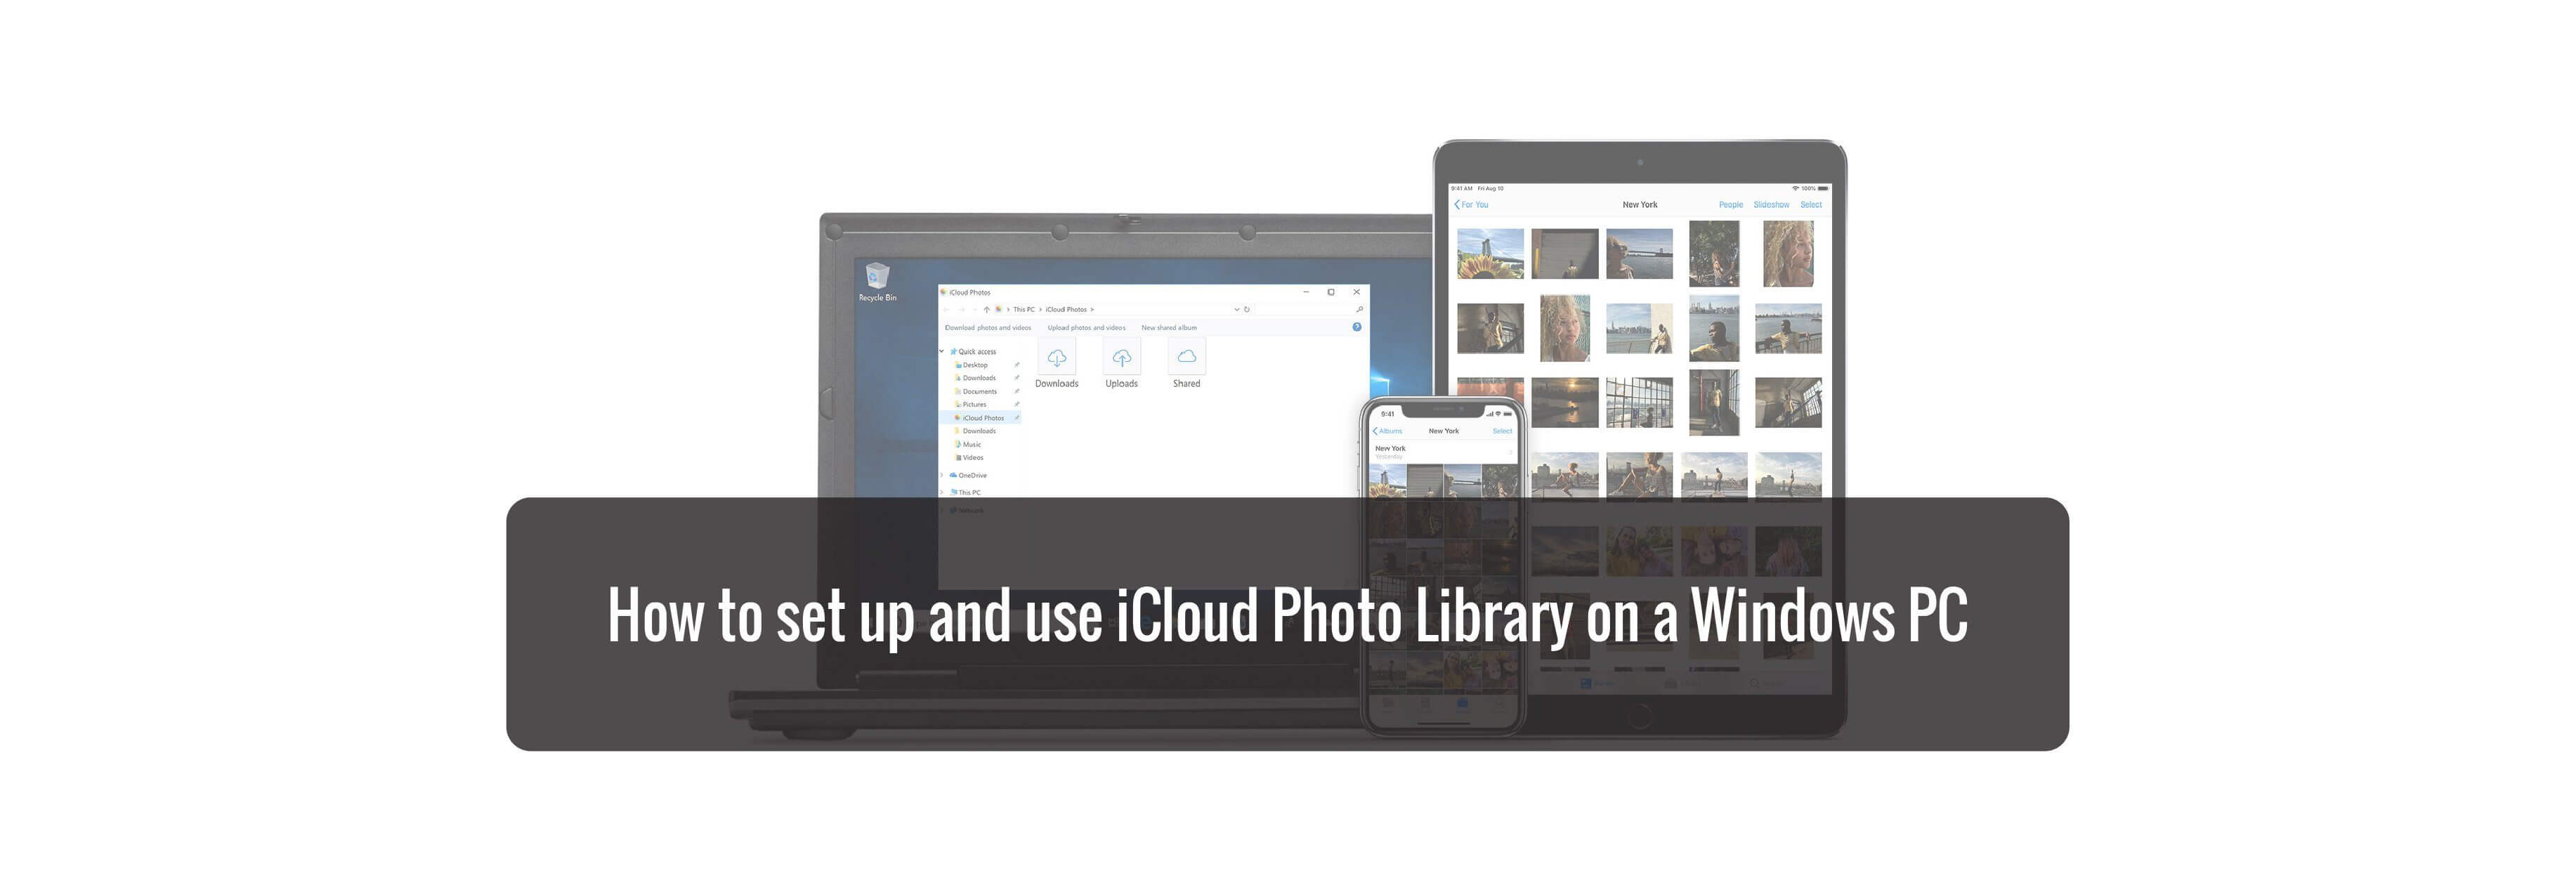 How to set up and use iCloud Photo Library on a Windows PC